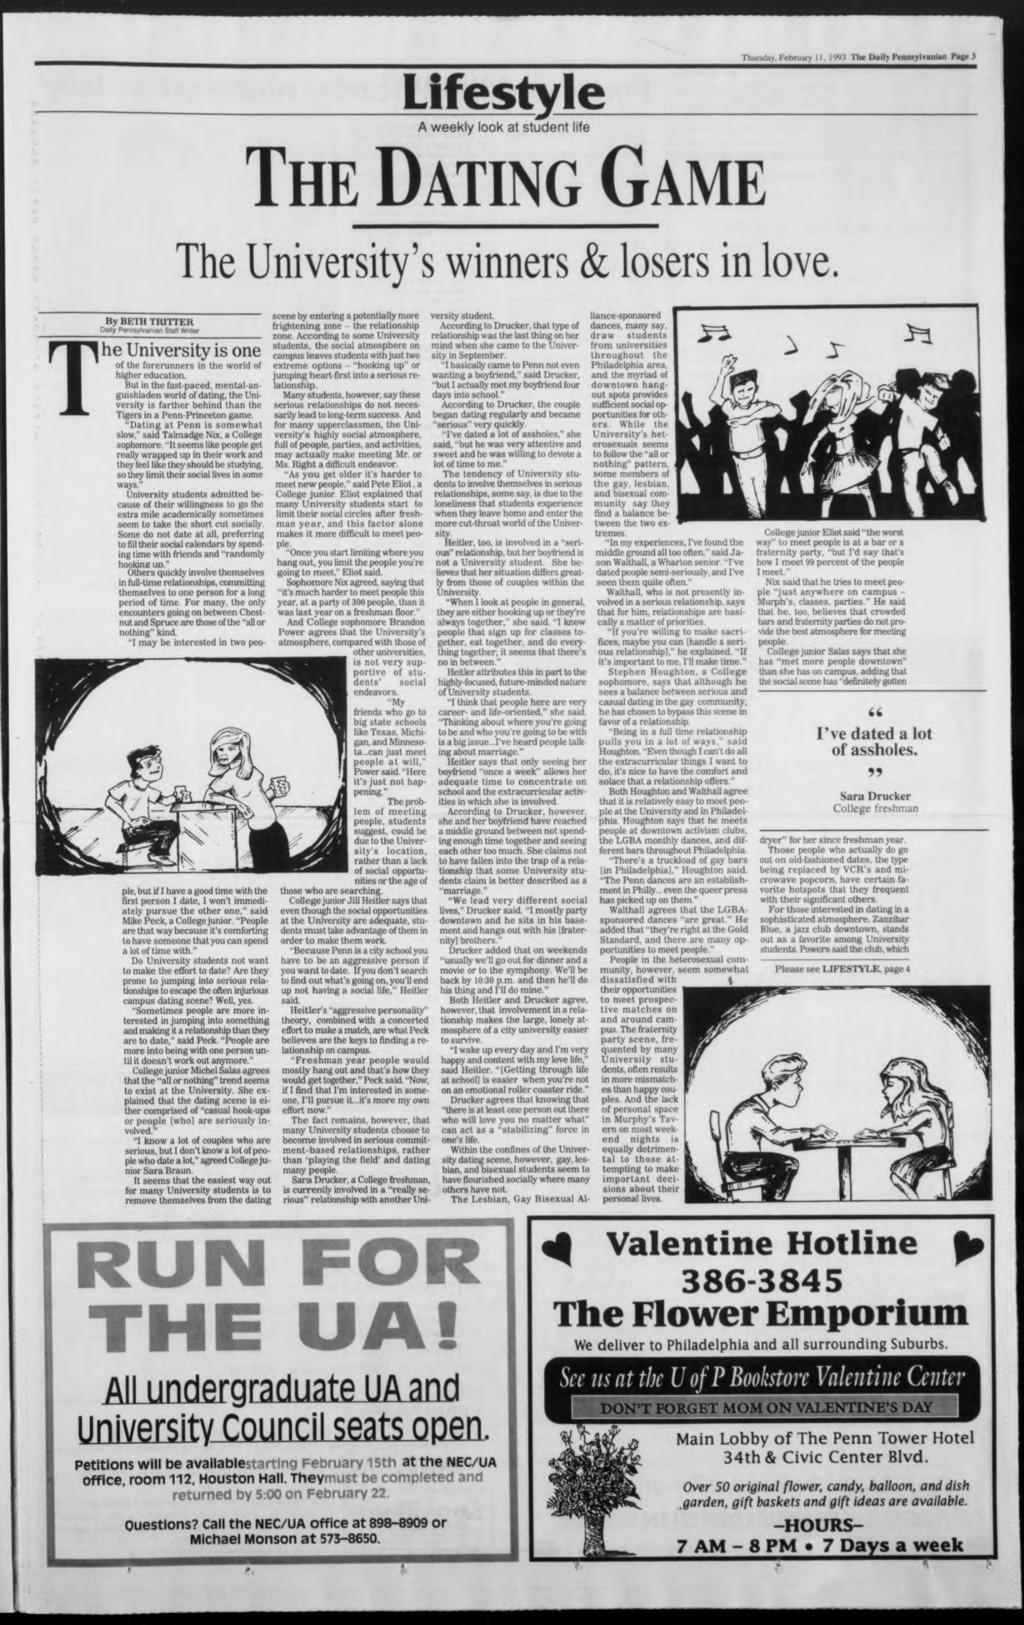 Lfestyle A weekly look at student lfe Thursday. February II. 1993 The Daly Pennsylvana!! Page 3 THE DATING GAME The Unversty's wnners & losers n love.